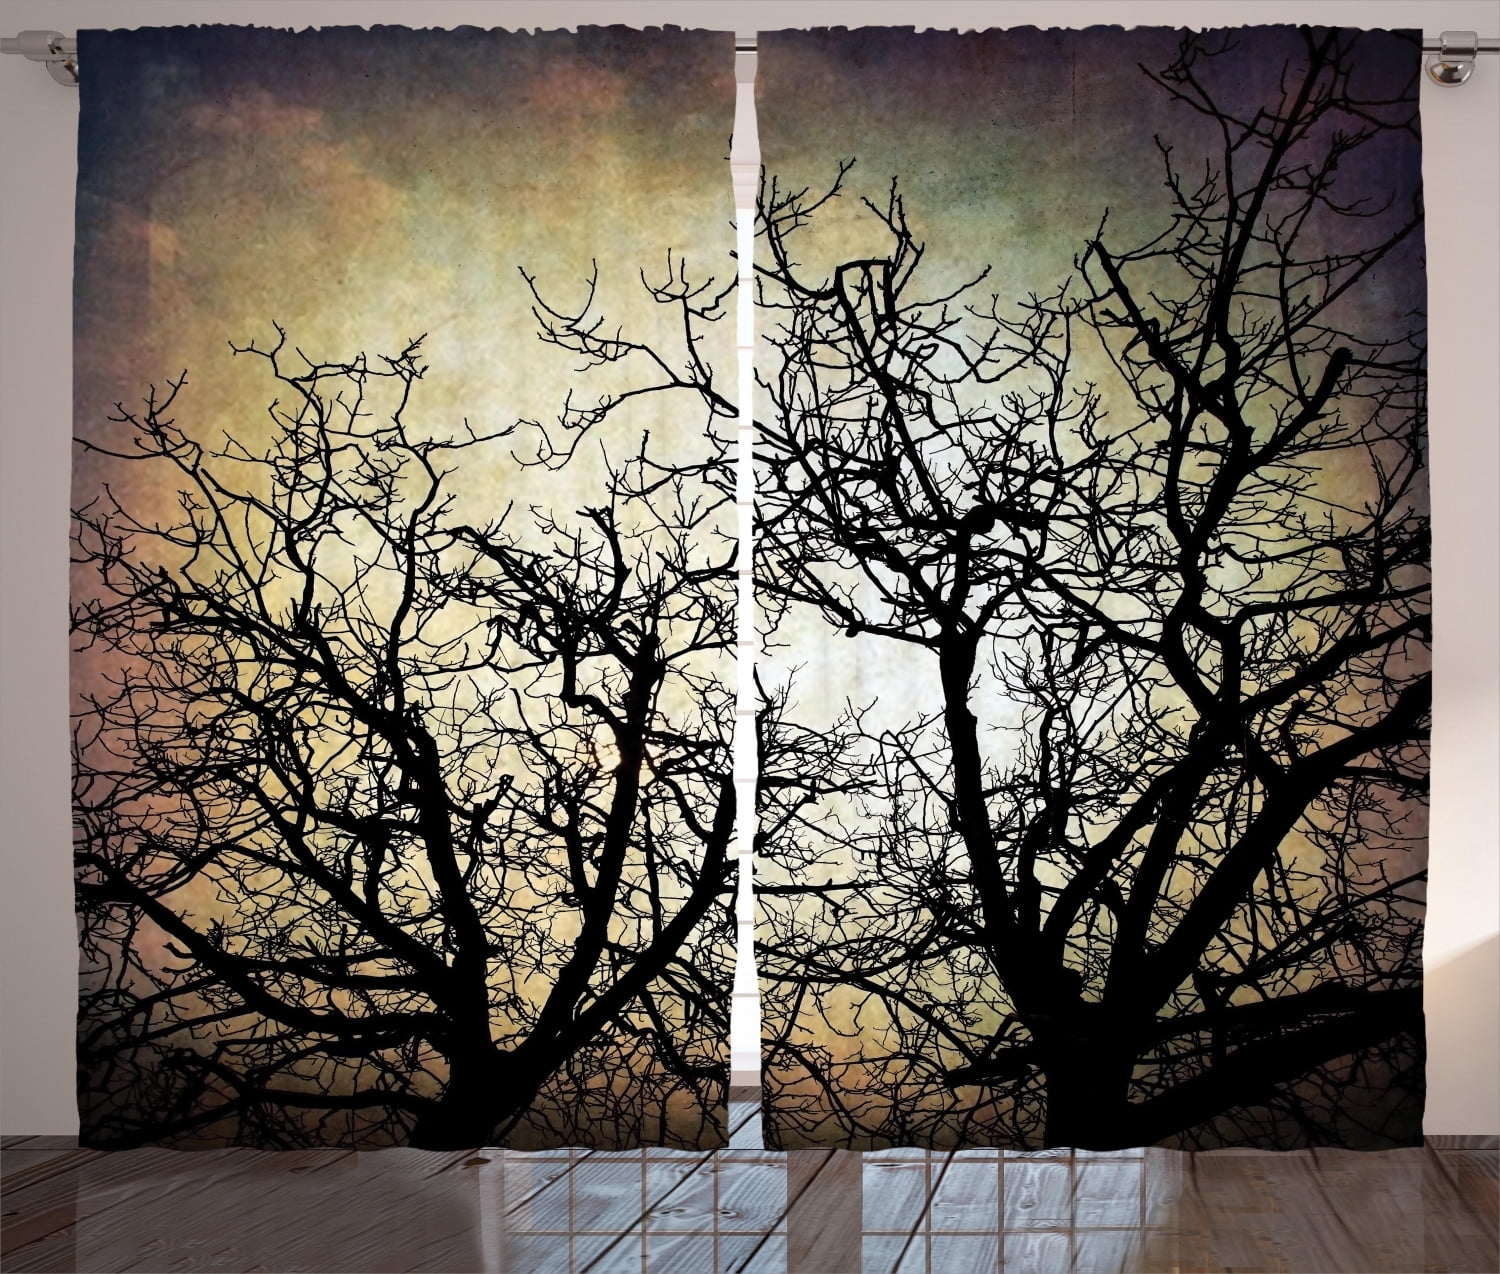 108 X 90 Living Room Bedroom Window Drapes 2 Panel Set Ambesonne Horror Curtains Sepia Black Scary Twilight Scene with Grunge Tree Branch Silhouette Over Dirty Night Sky Image